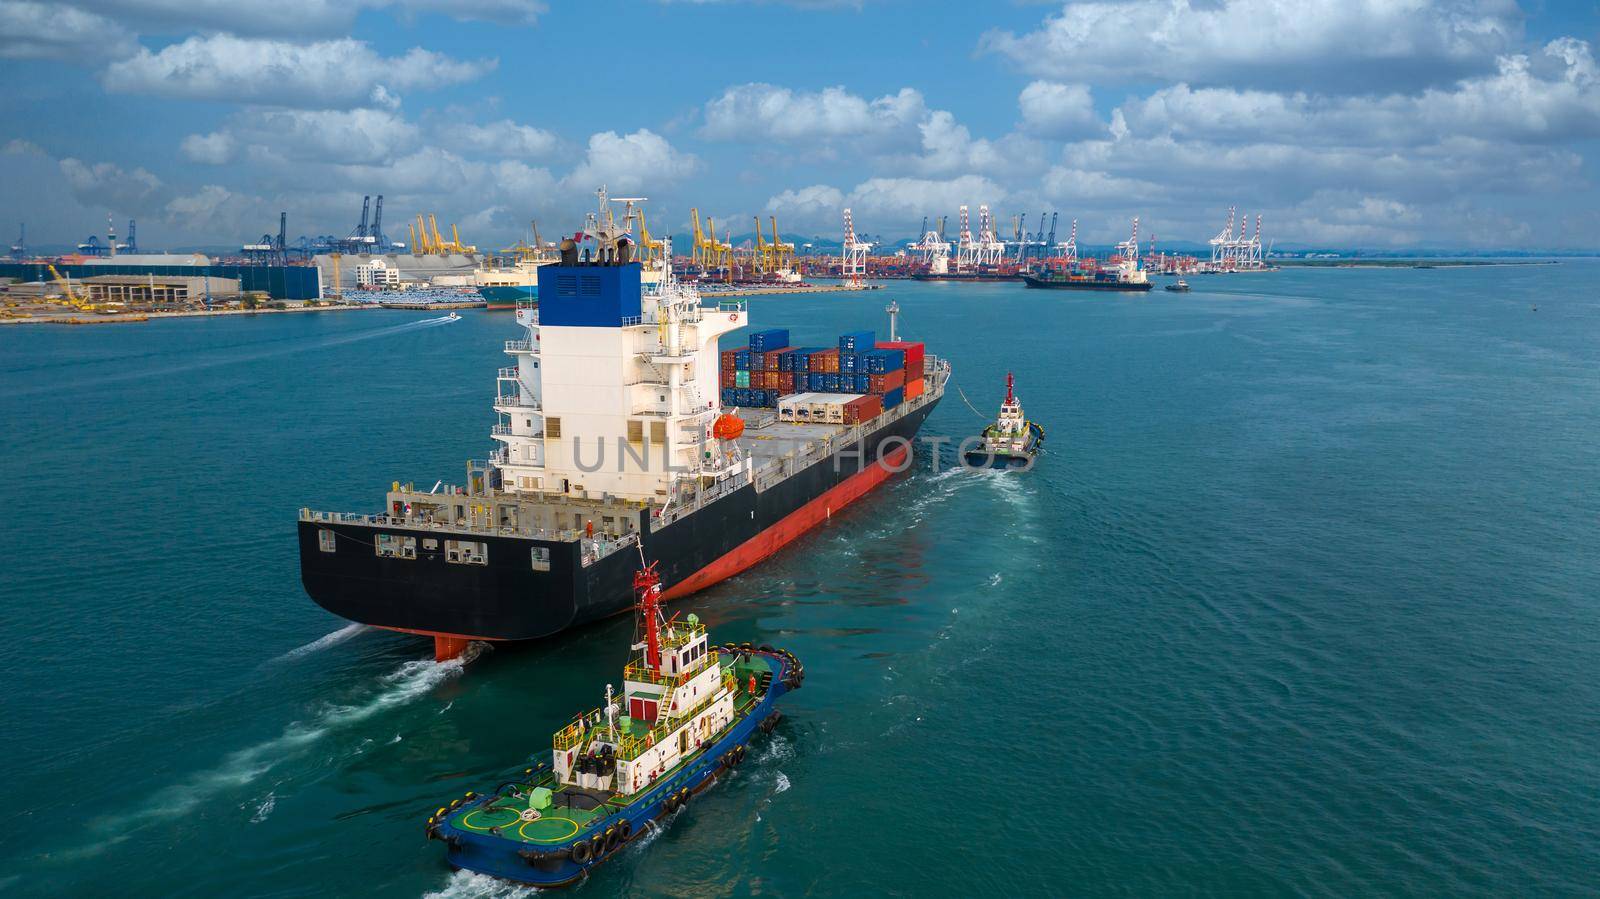 Container ship carrying container box in import export to commercial port, Global business cargo freight shipping commercial trade logistic and transportation oversea worldwide by container vessel. by AvigatoR